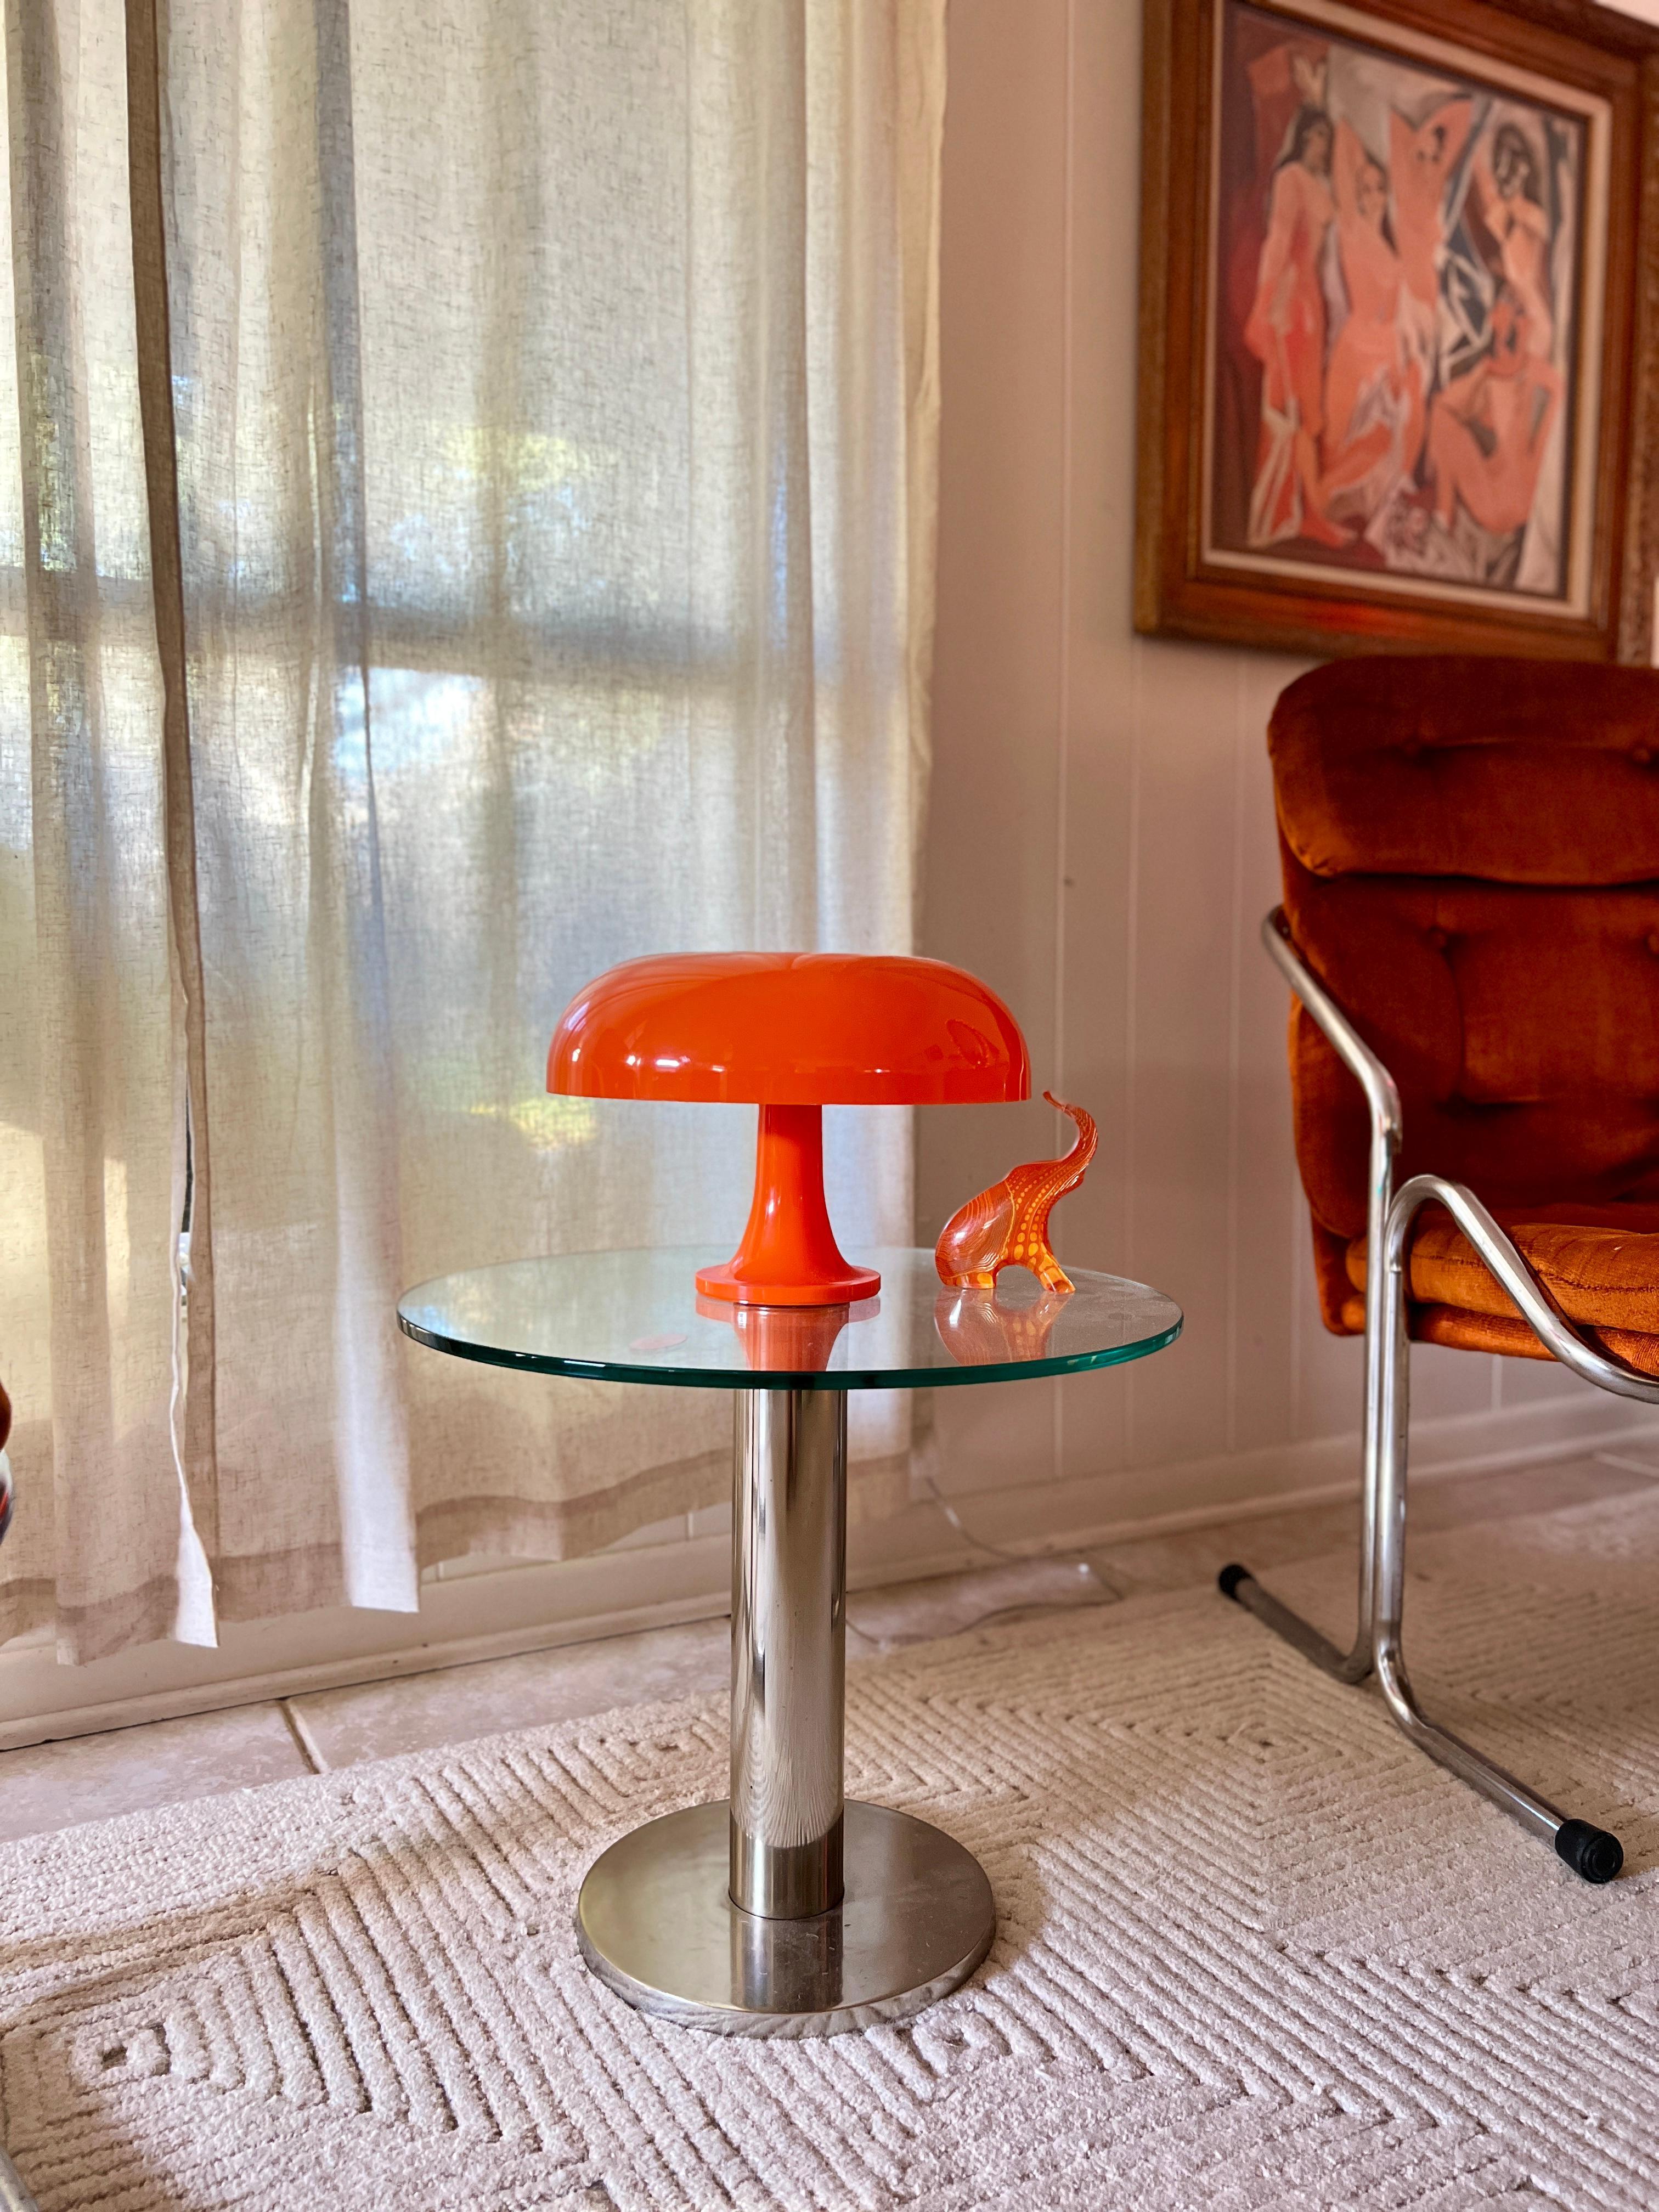 Vintage glass and chrome side table by Mirodan, made in Belgium circa 1960s. Modernist thick chrome column supports 1/4” glass top. Structurally sound and in very good condition with some minor scratches on the glass. Mirodan sticker is still